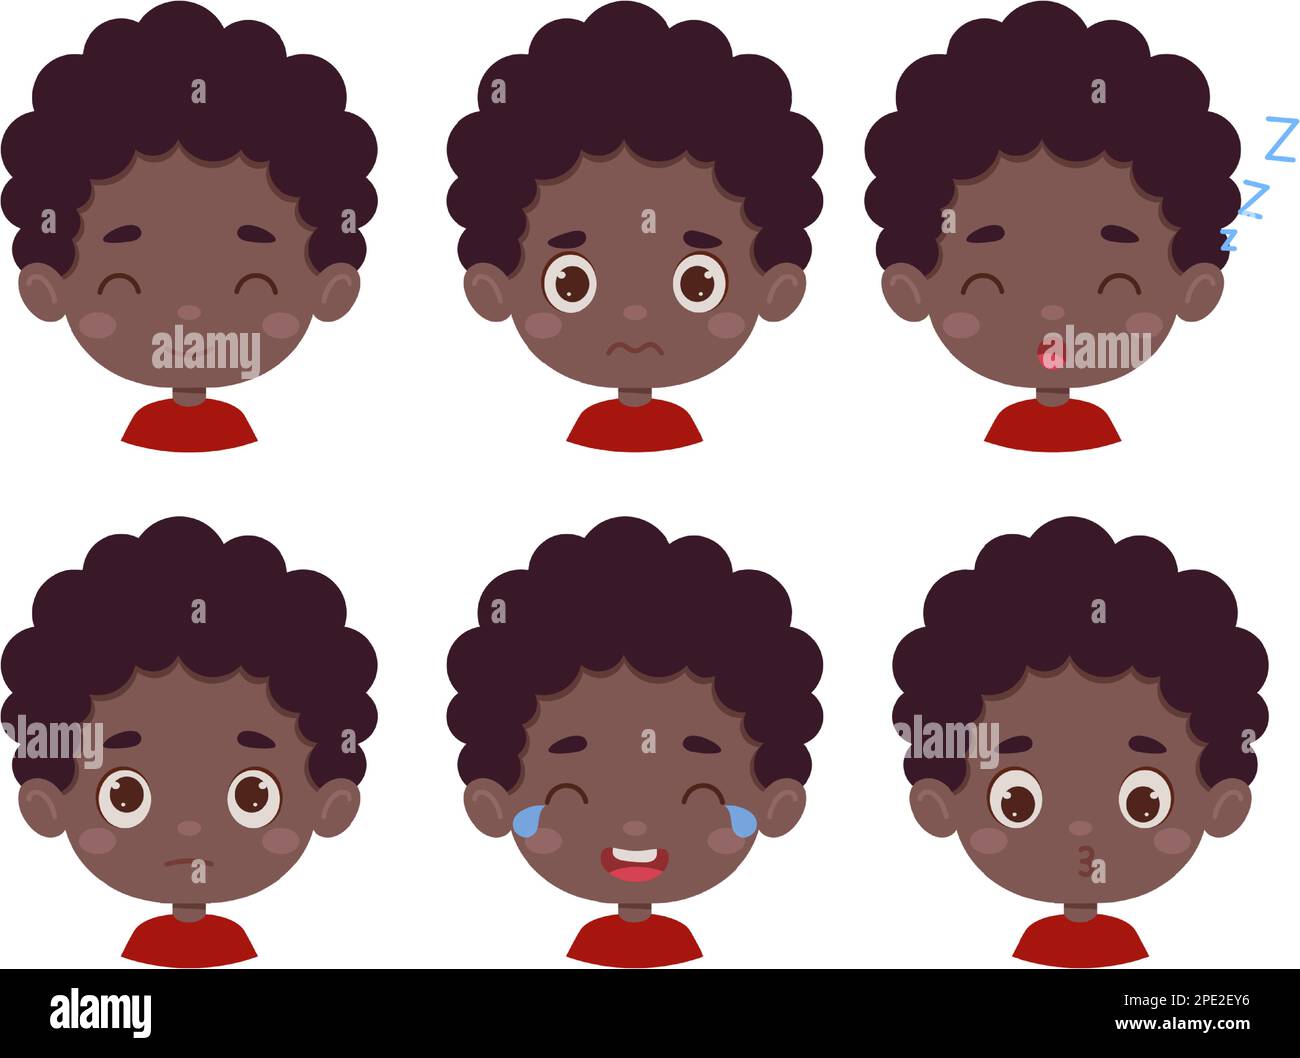 Little girl scared face expression cartoon Vector Image